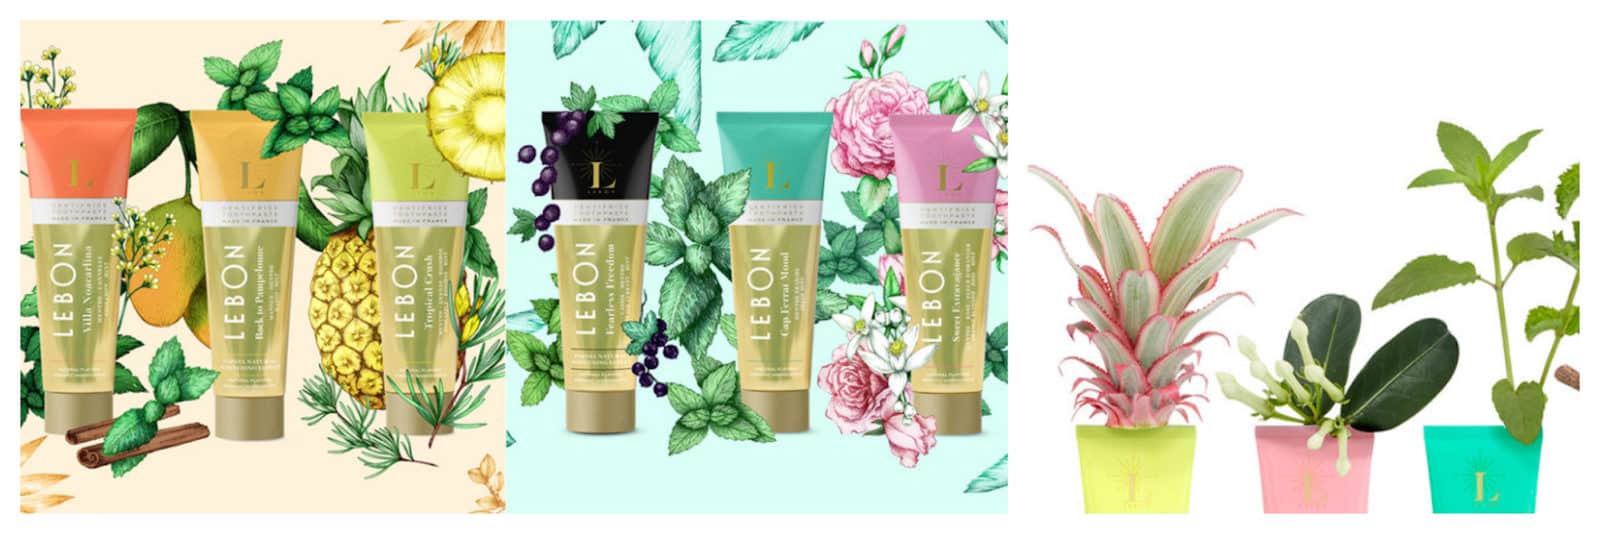 Le Bon French toothpaste made from plants is free from triclosan, a potentially toxic ingredient, available to buy at French beauty brand store in Paris, Oh My Cream!